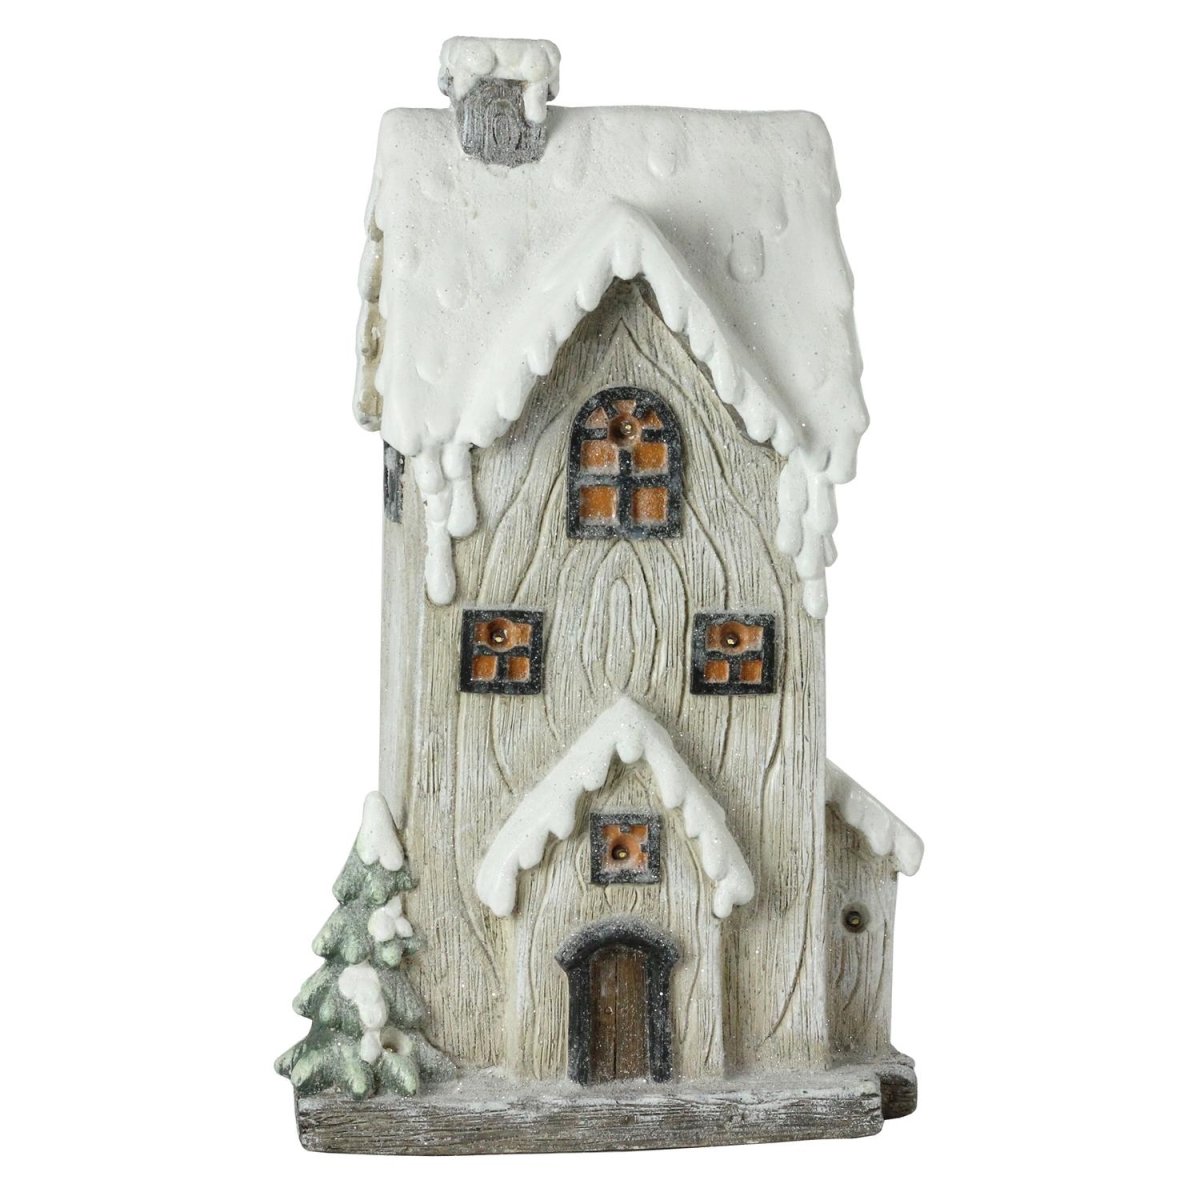 32635025 19 In. Led Lighted Battery Operated Rustic Glittered 2-story House Christmas Decoration